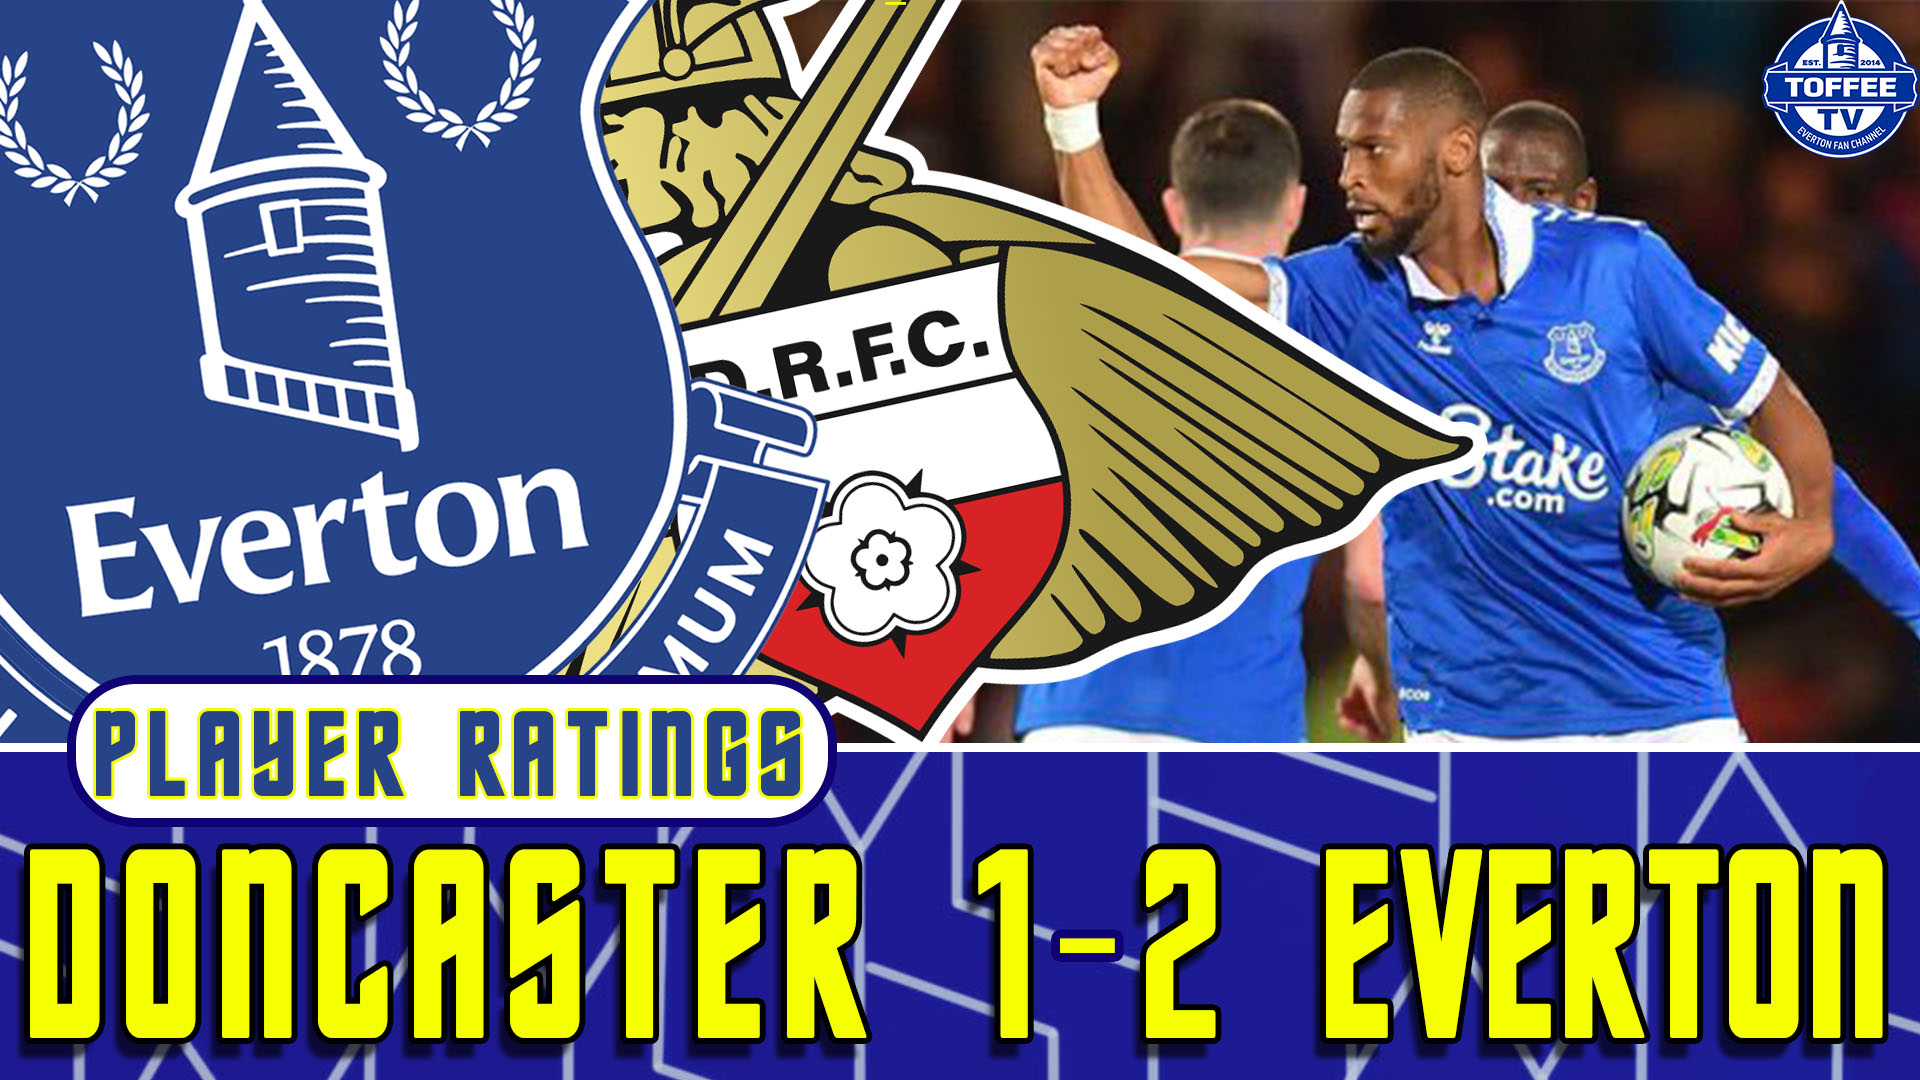 Featured image for “VIDEO: Doncaster Rovers 1-2 Everton | Player Ratings”